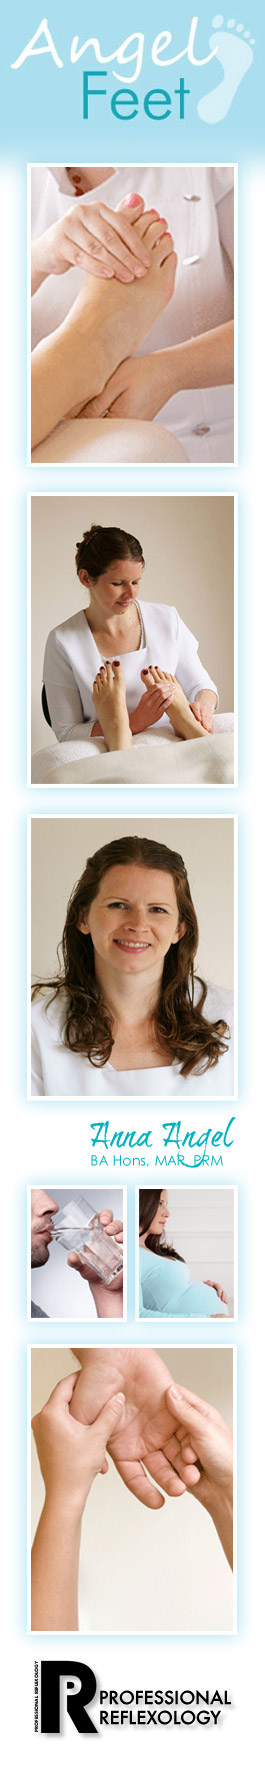 Profile picture for Angel Feet - Professional Reflexology